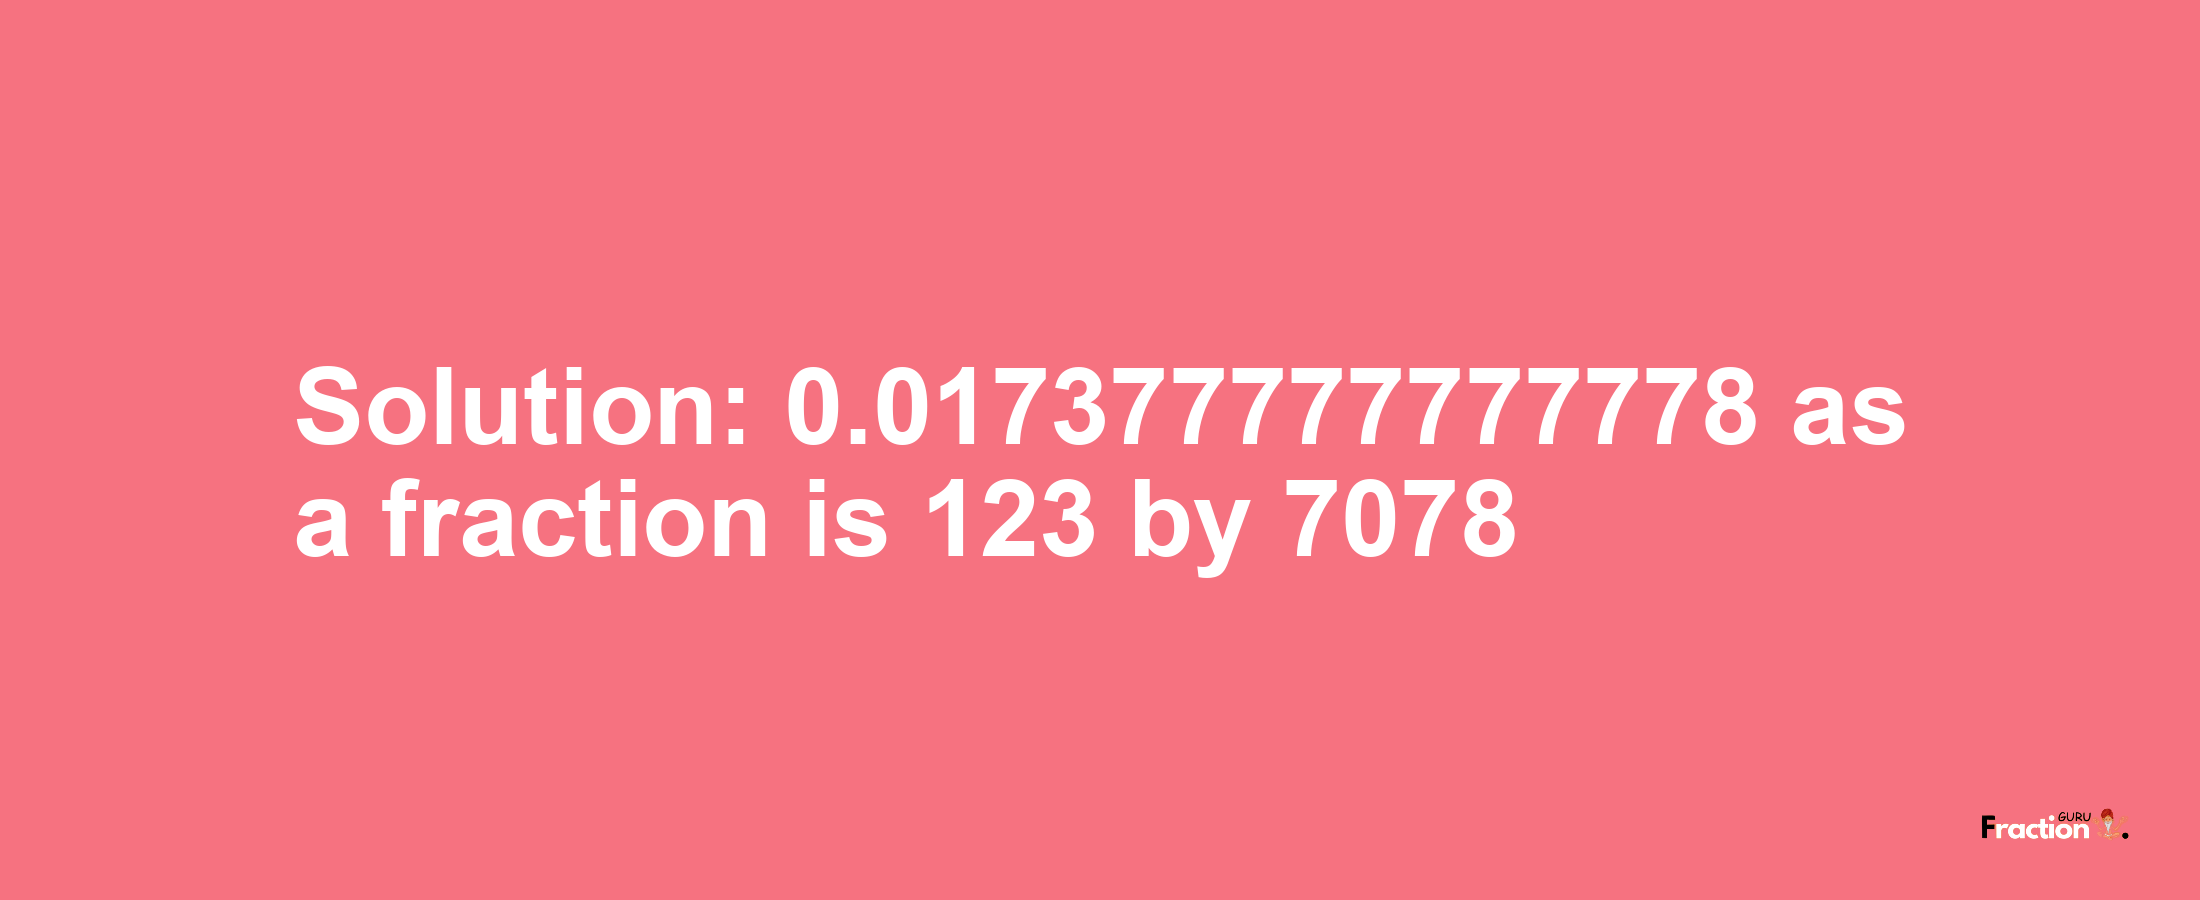 Solution:0.017377777777778 as a fraction is 123/7078